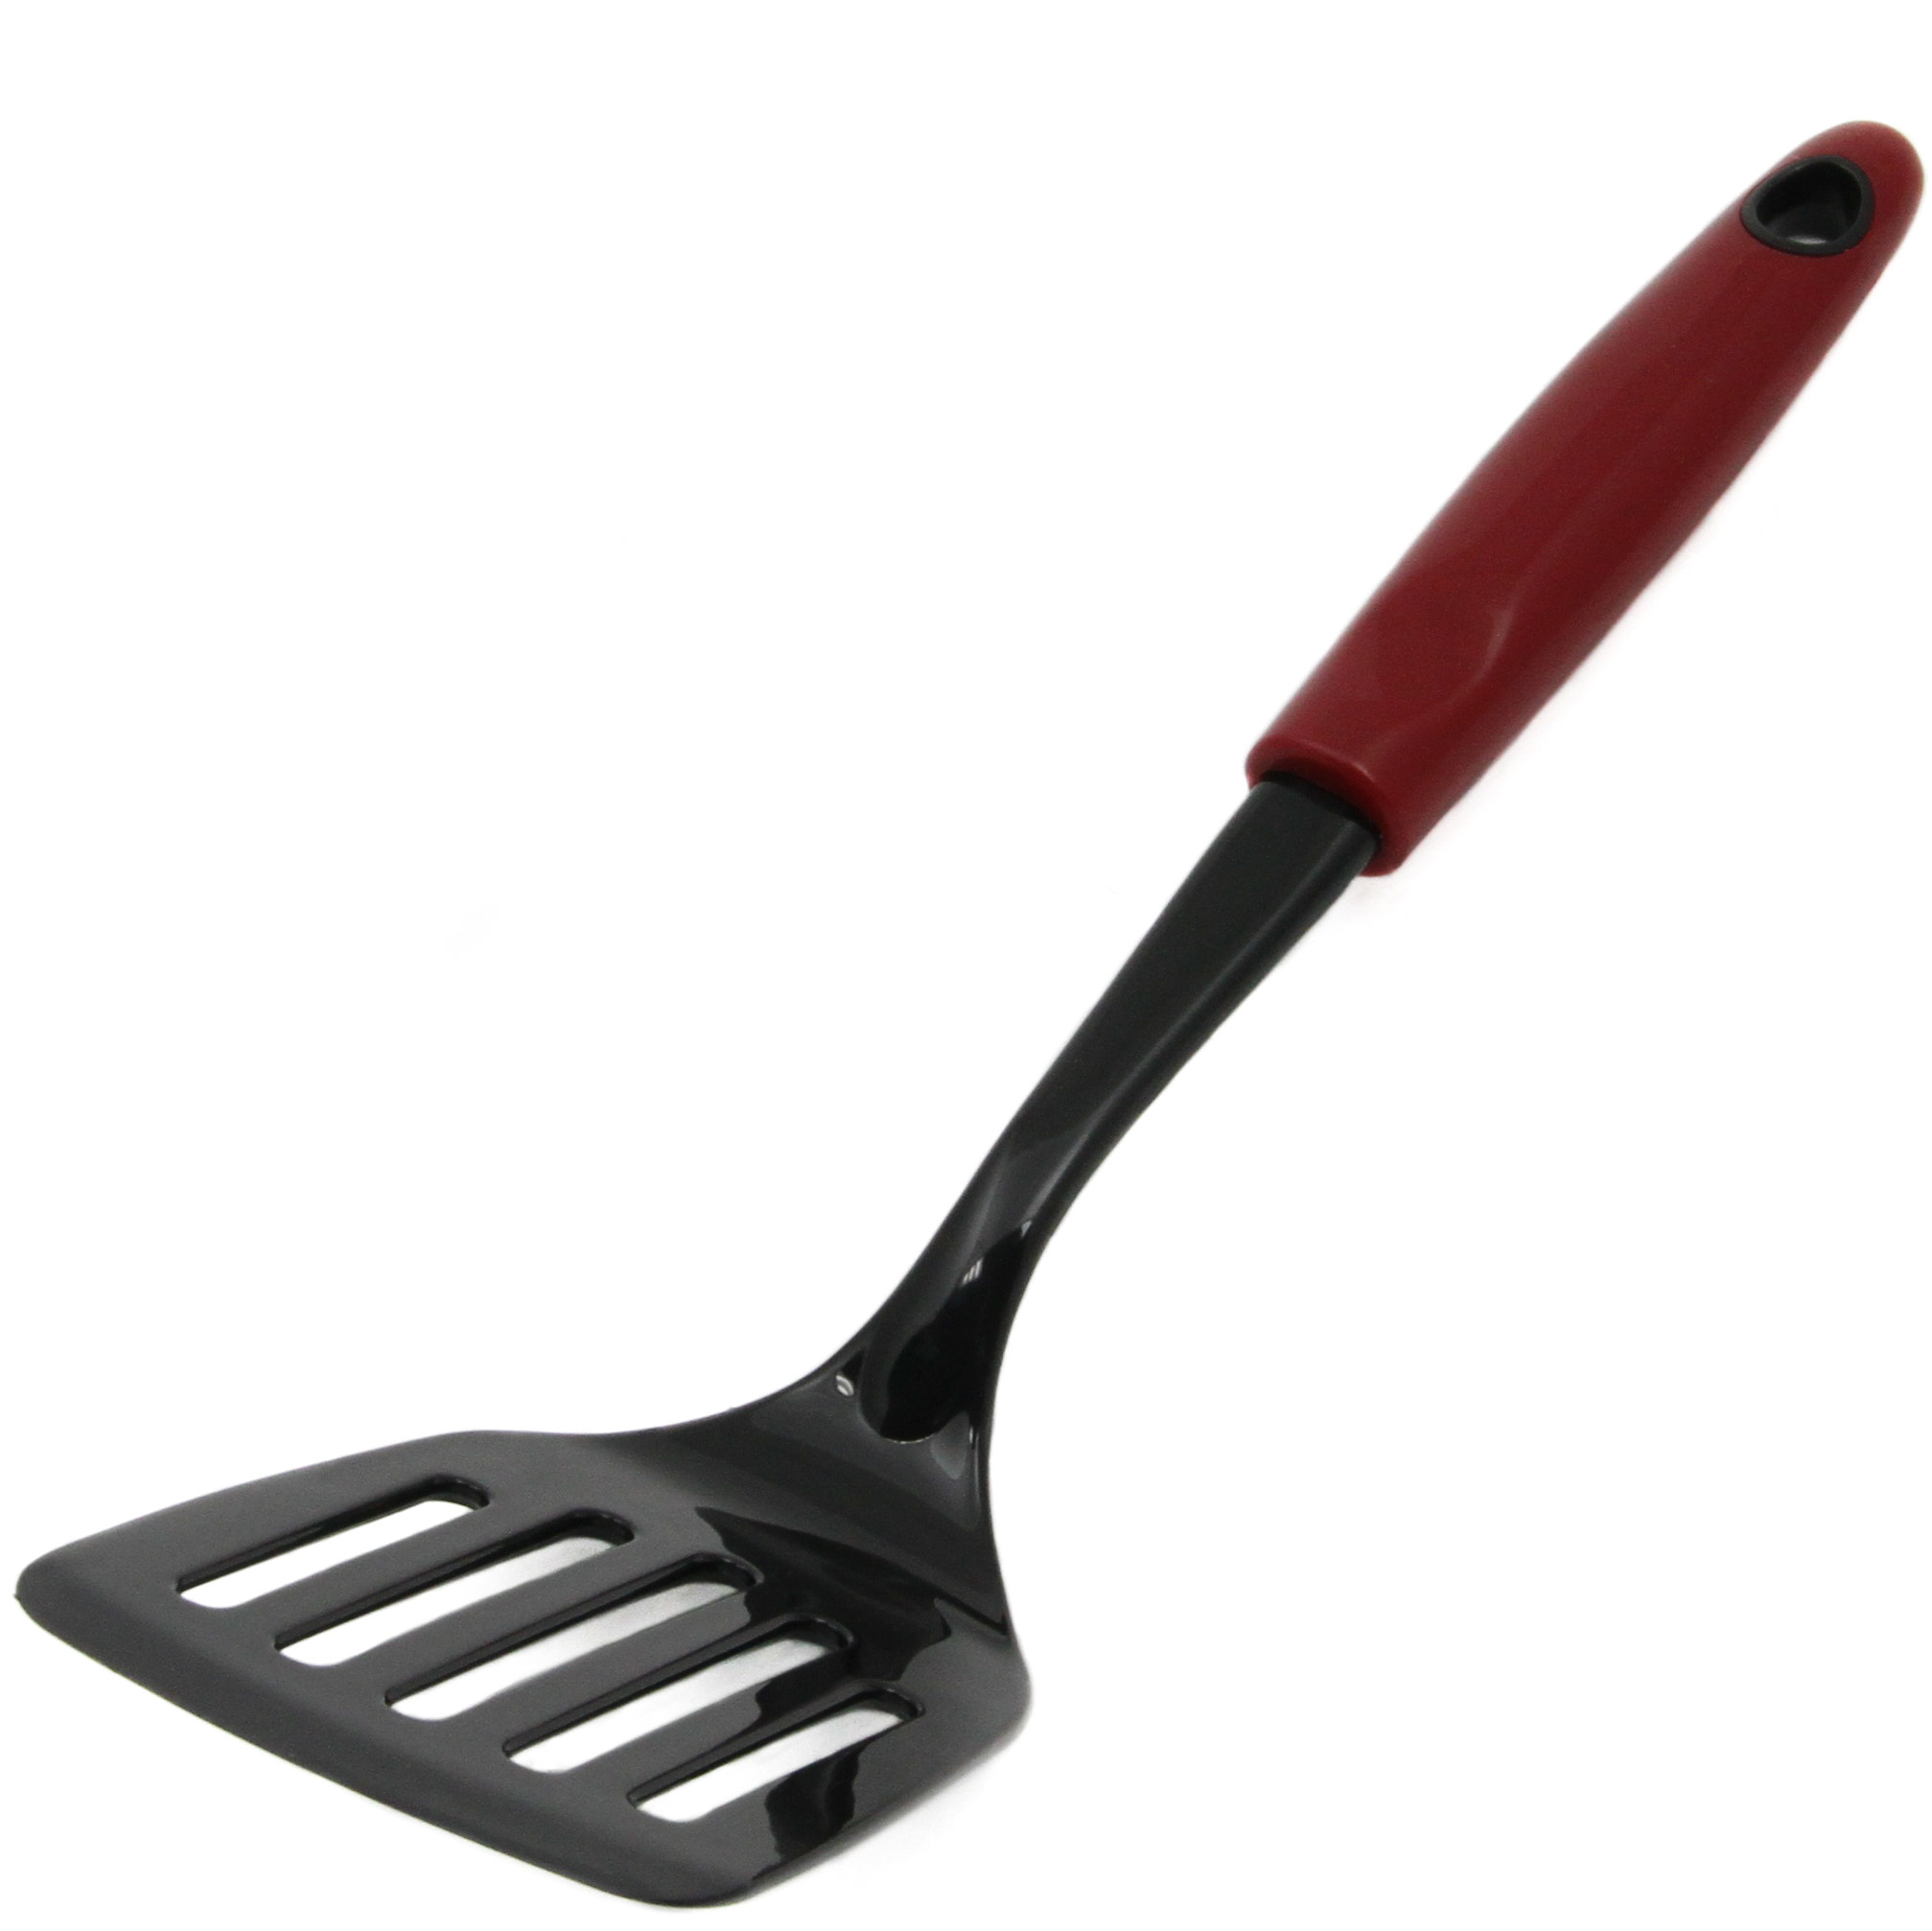 A spatula with a red handle